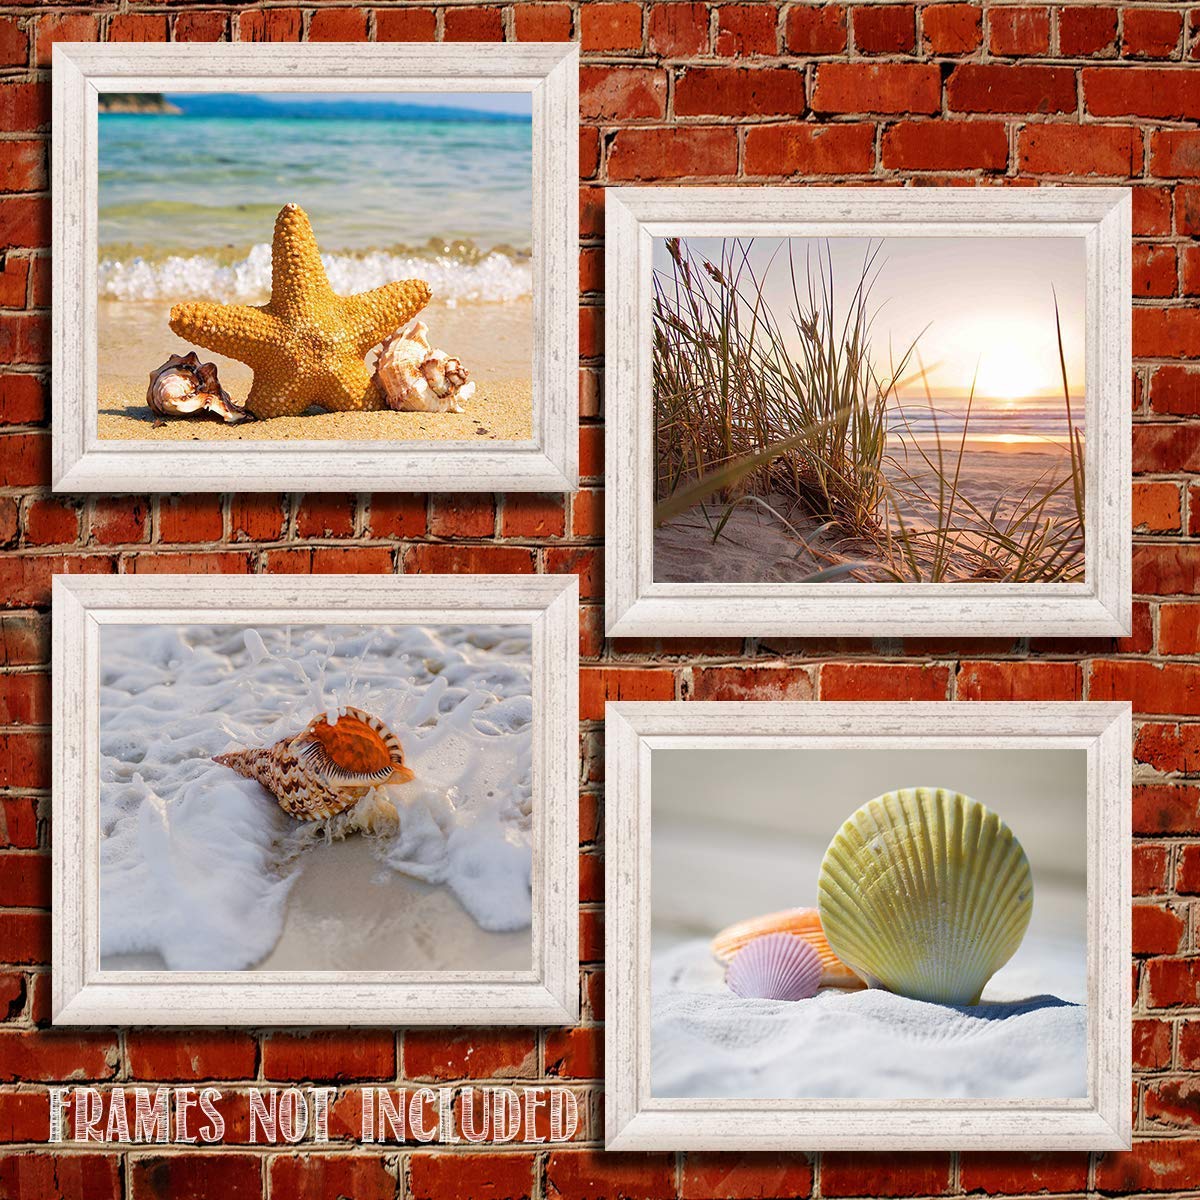 Beach & Sea Shell Collection- 4 Print Set- 8 x 10"s Prints Wall Art- Ready to Frame. Home D?cor- Office D?cor & Modern Art Prints for Beach Wall Decor. Great Gift For Ocean & Shell Lovers.